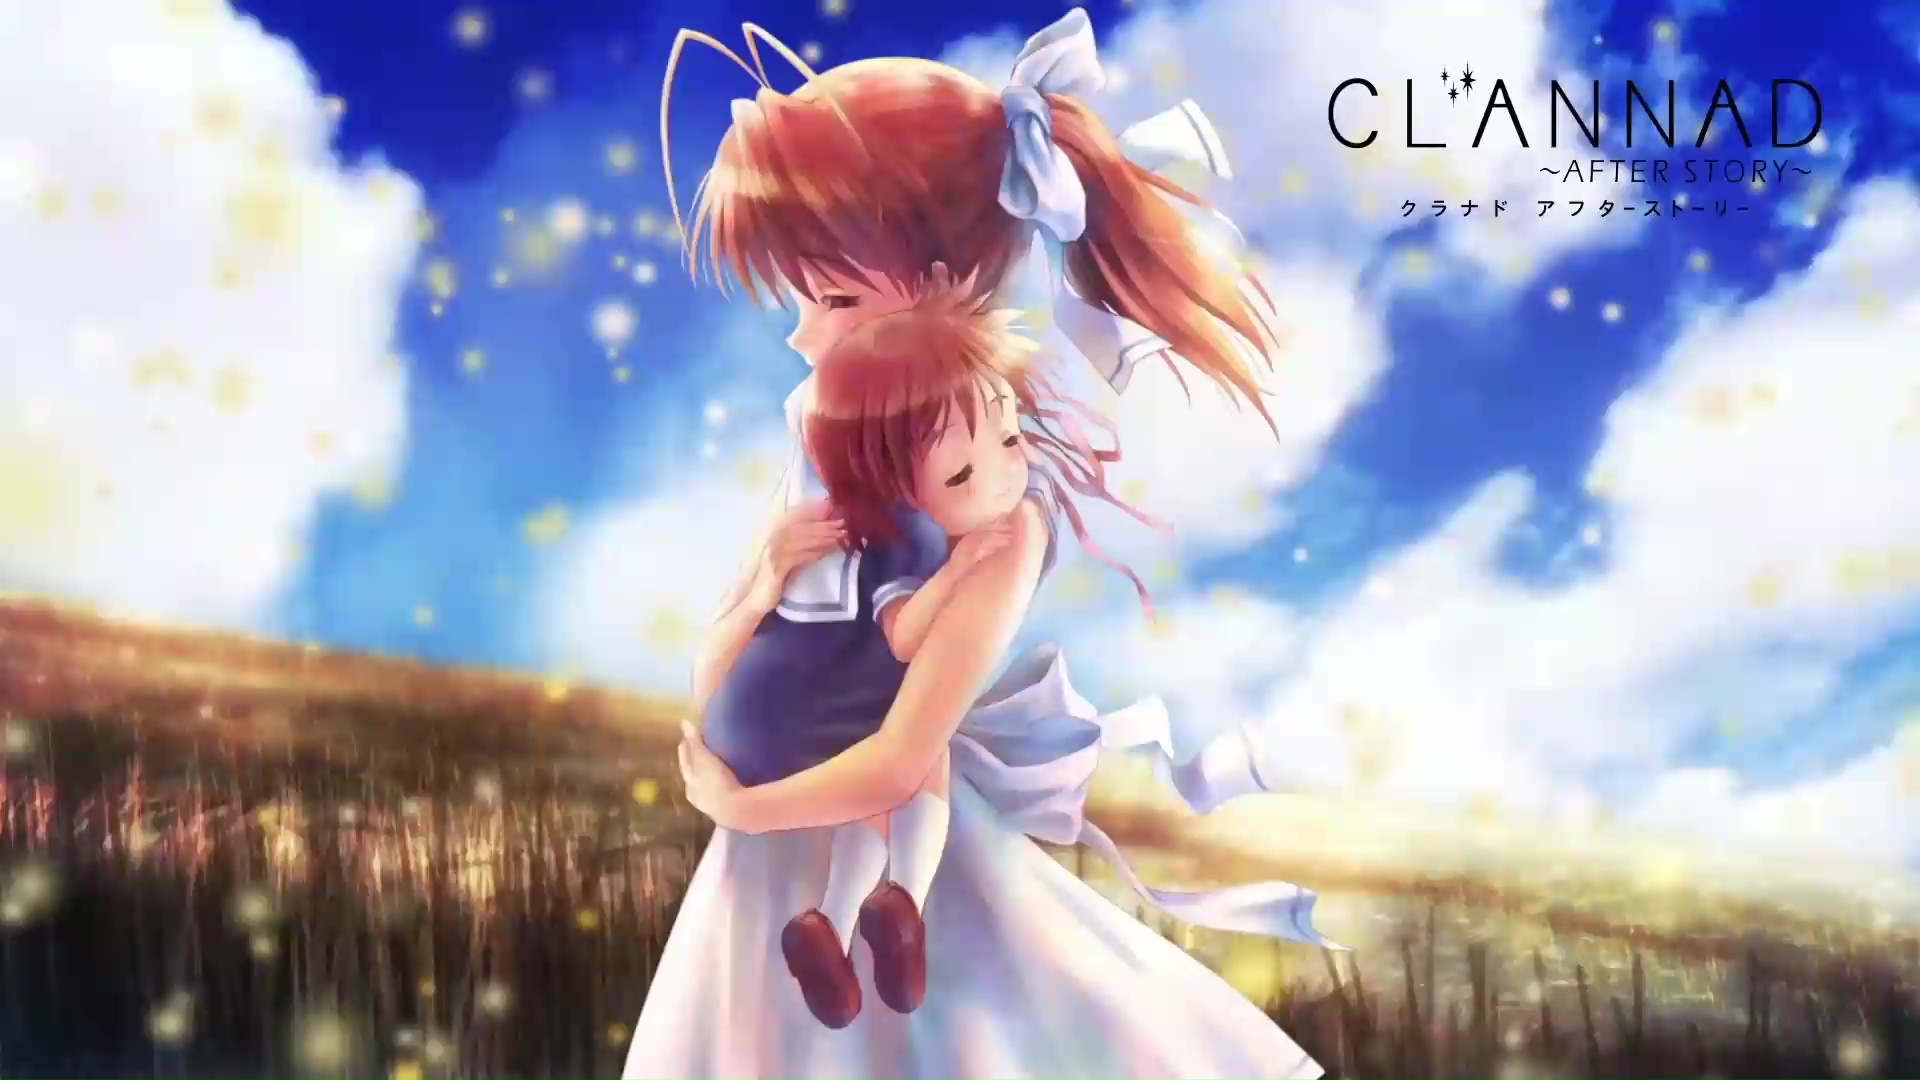 Clannad Wallpapers 2  Clannad anime, Anime, Clannad after story